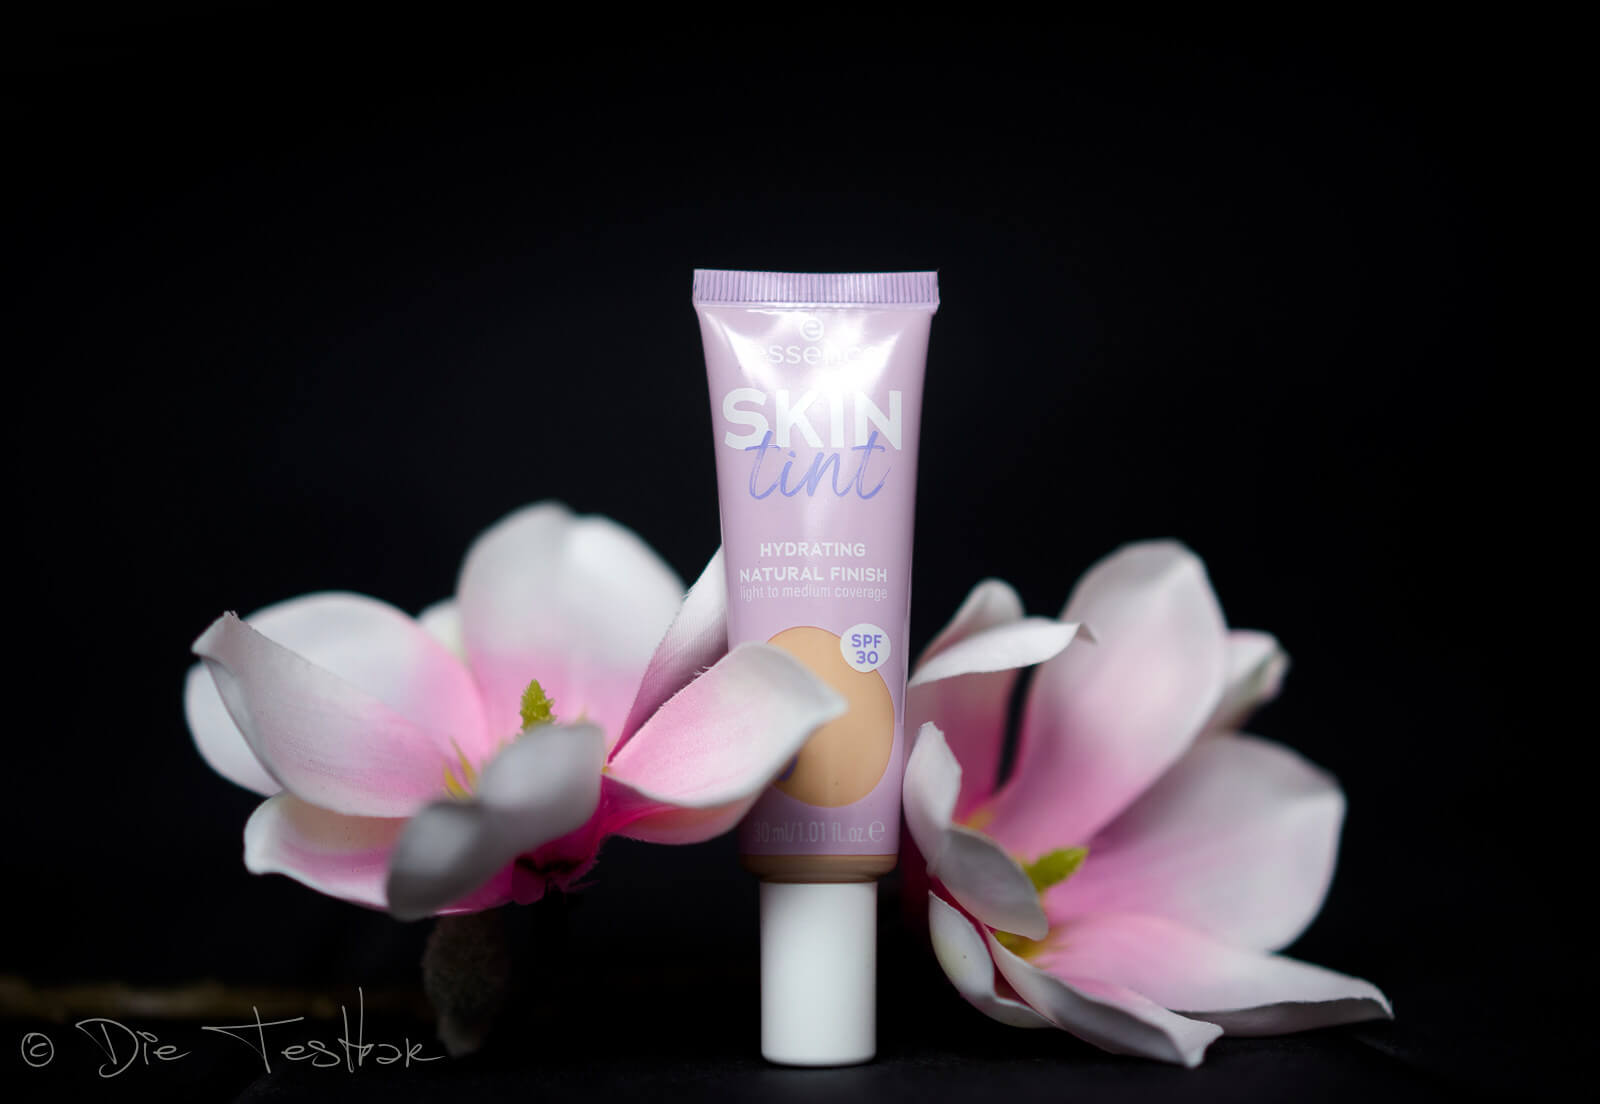 Review - Essence Foundation - Skin Tint Hydrating Natural Finish LSF 30 im Test 7